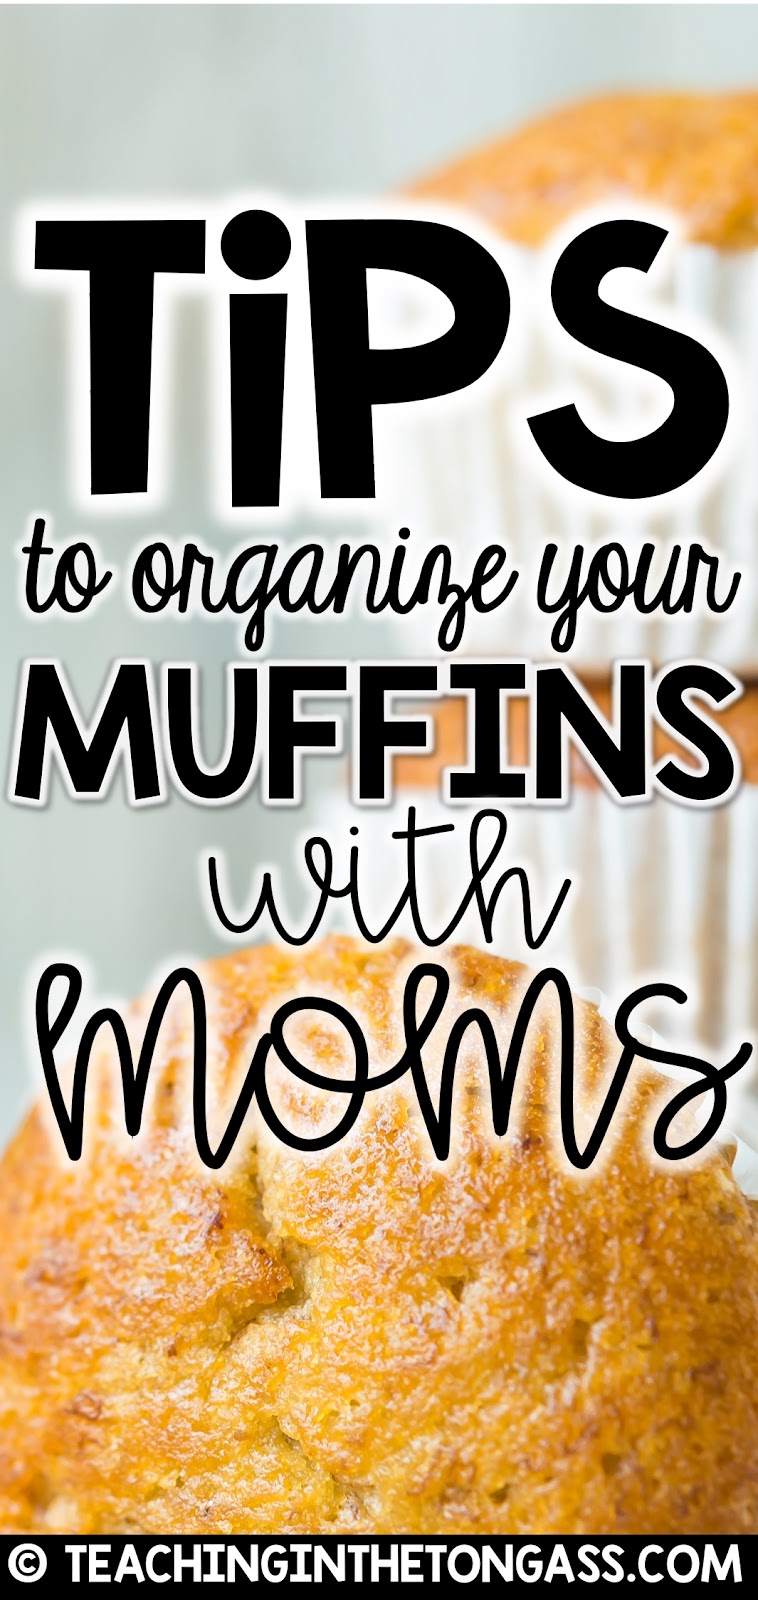 Muffins-with-Moms-activities